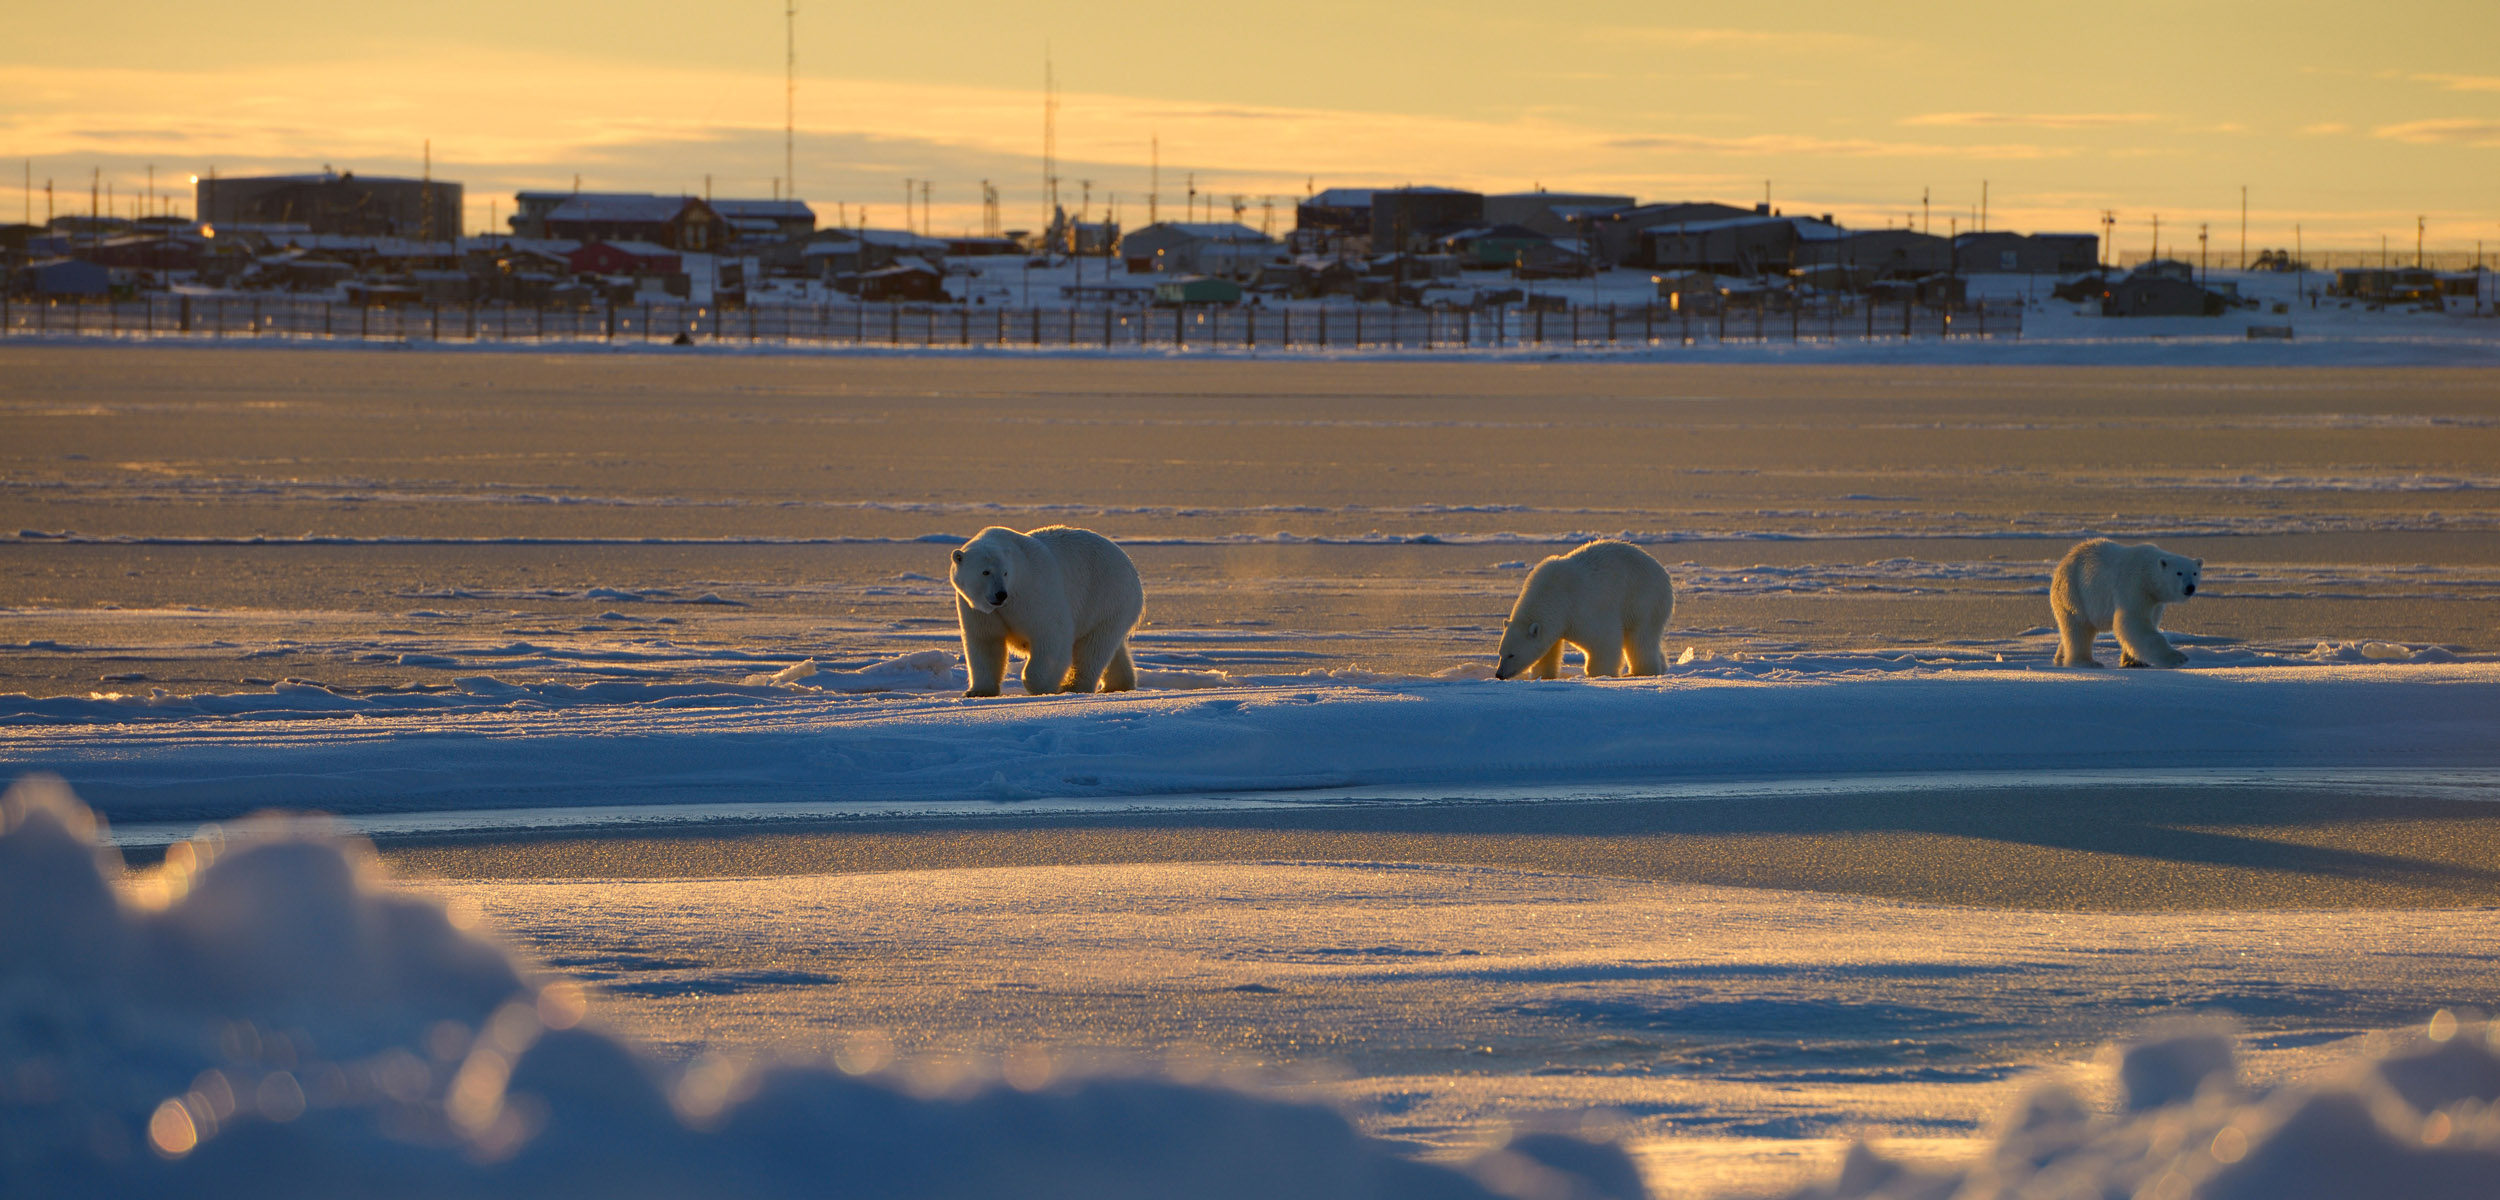 Polar bear sow and two cubs walking across an icy landscape with a town in the background